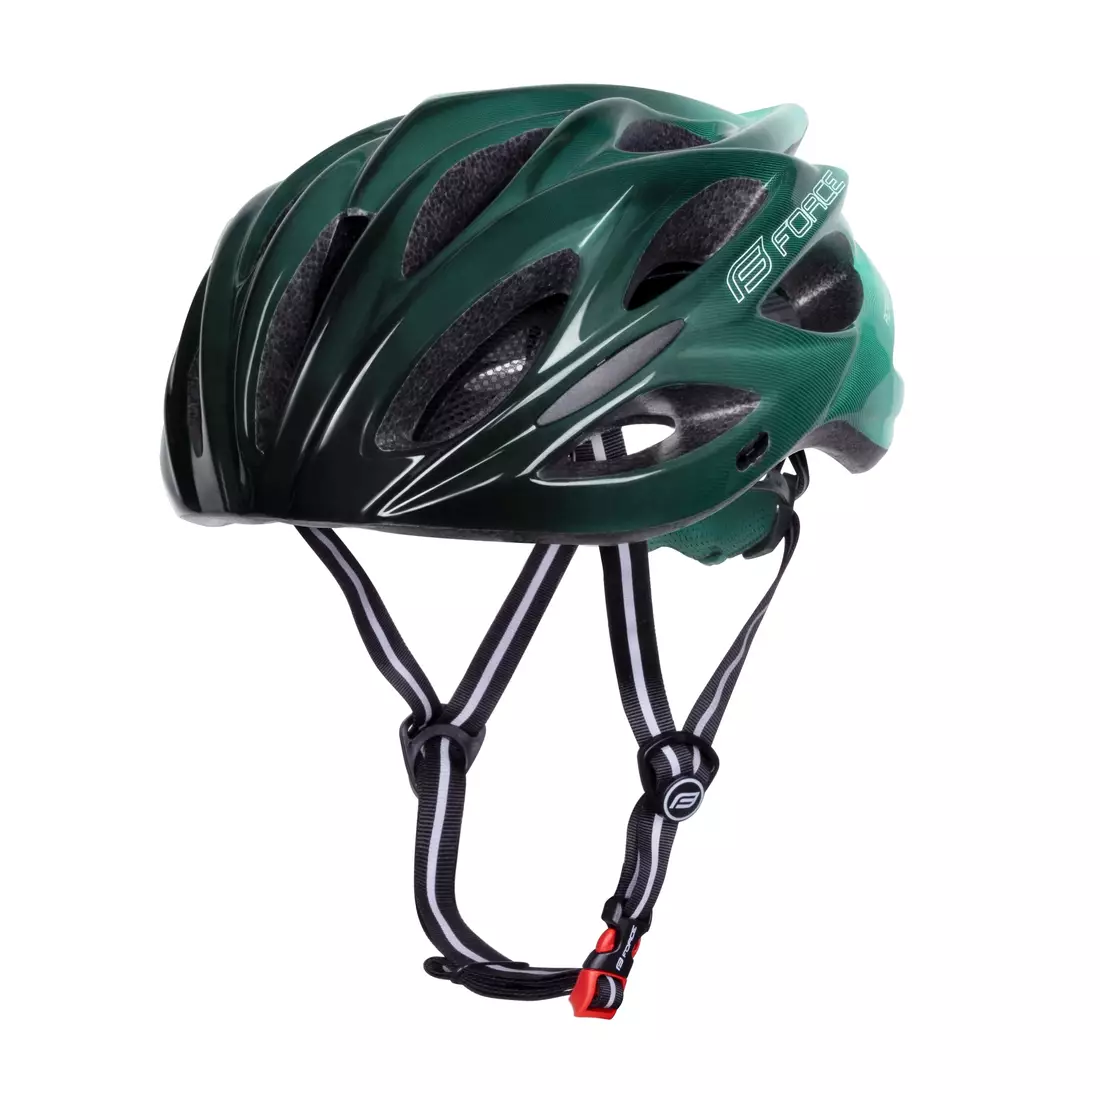 FORCE bicycle helmet BULL HUE, black and turquoise, 9029055